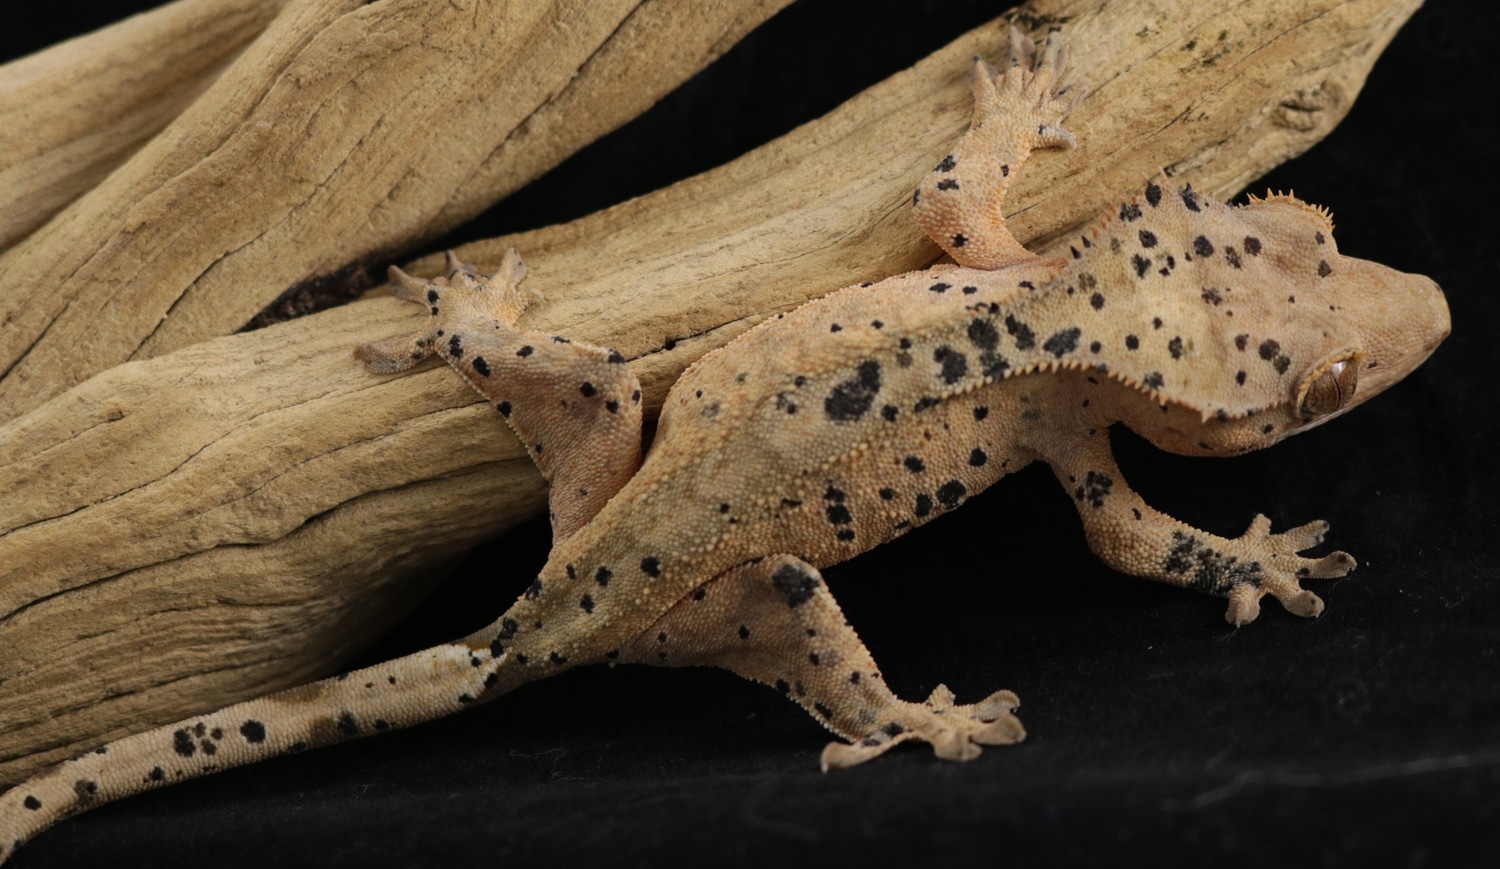 Superdal Cluster Spots - Paprika Crested Gecko by Reptilian Overlords Inc.